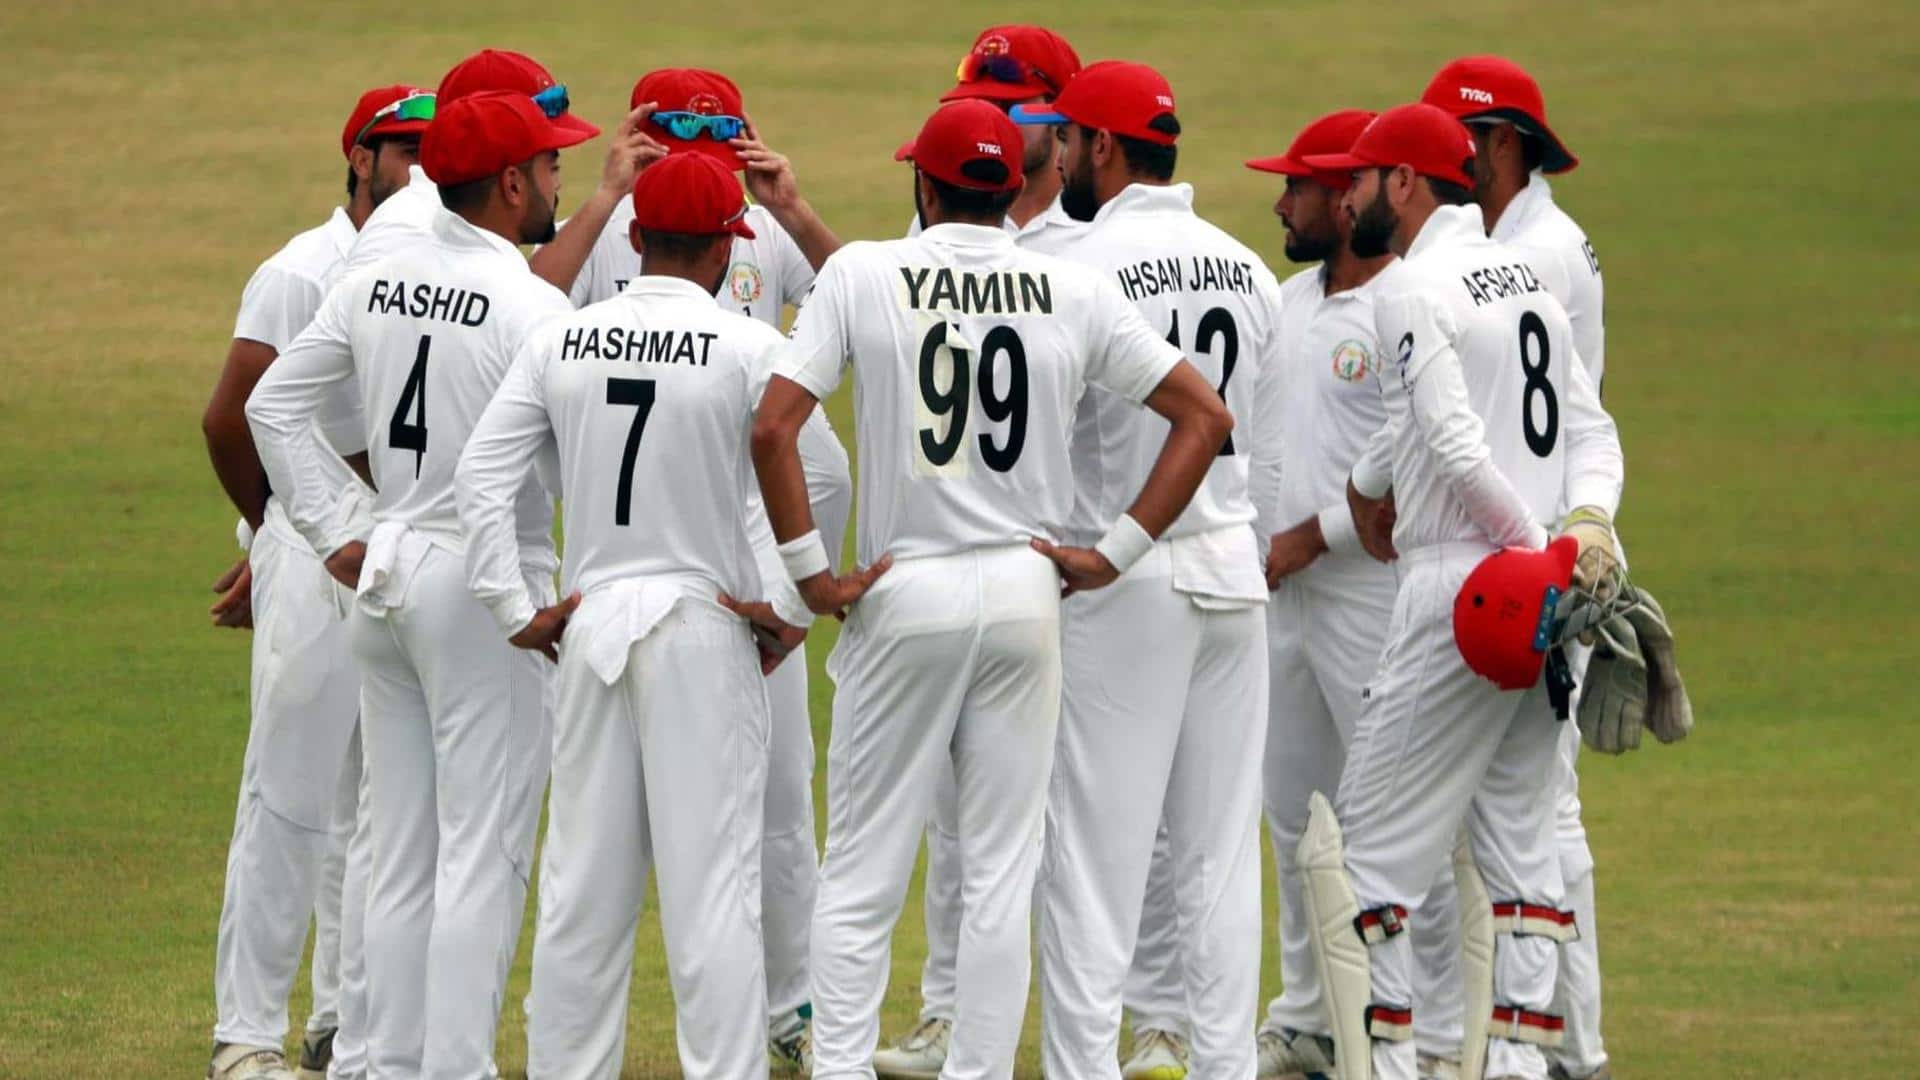 Bangladesh vs Afghanistan, one-off Test: Decoding the player battles